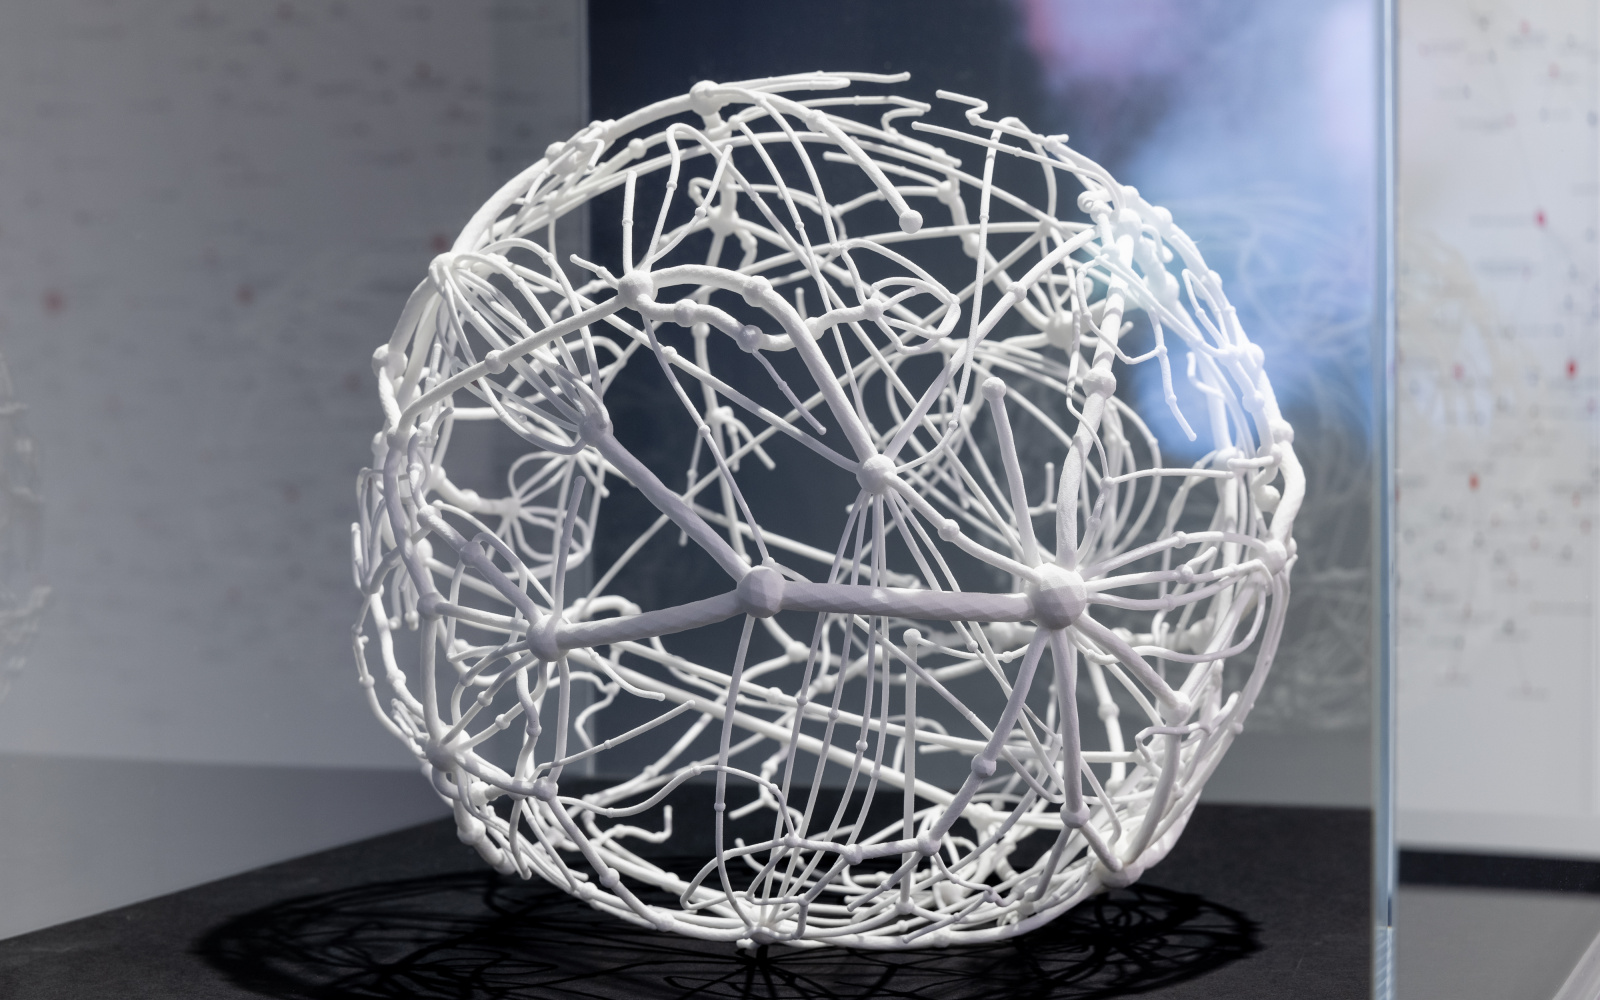 A 3D print of a sphere consisting of a tightly branched network.